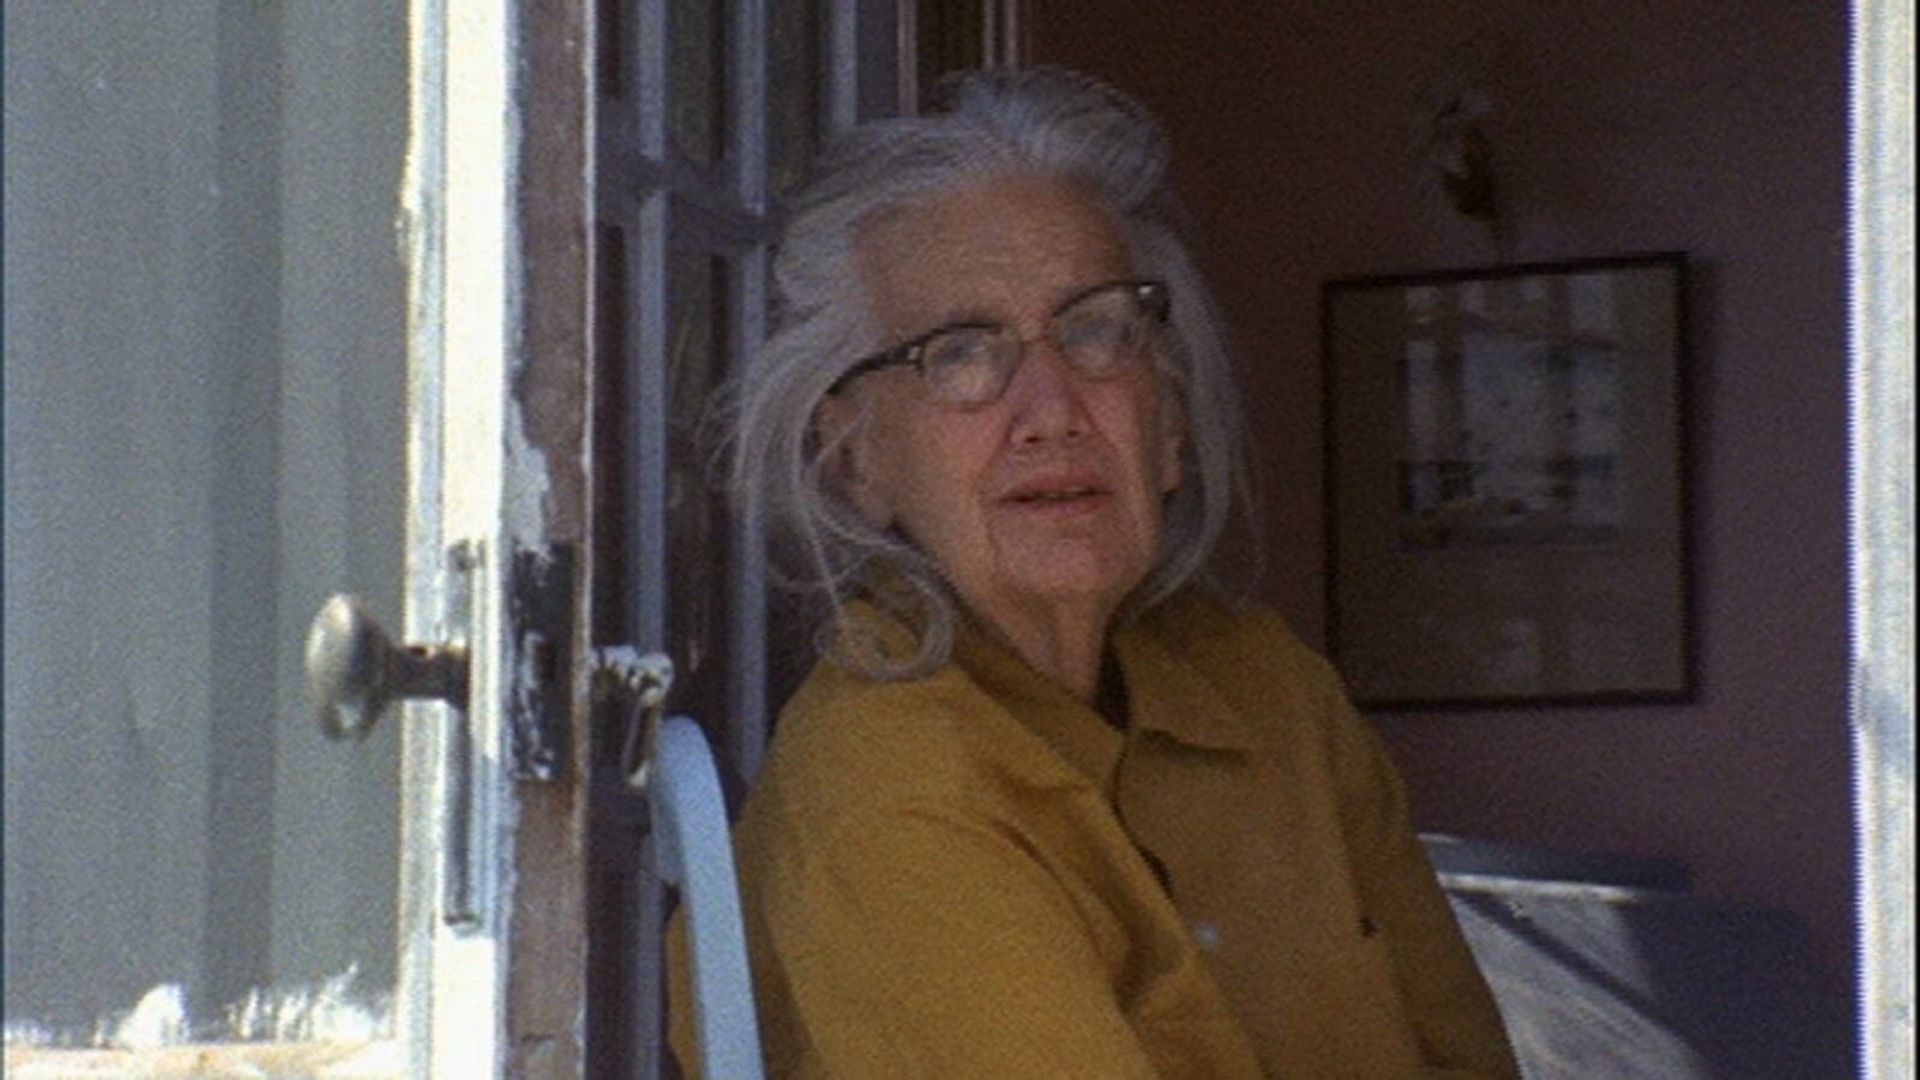 The Beales of Grey Gardens background